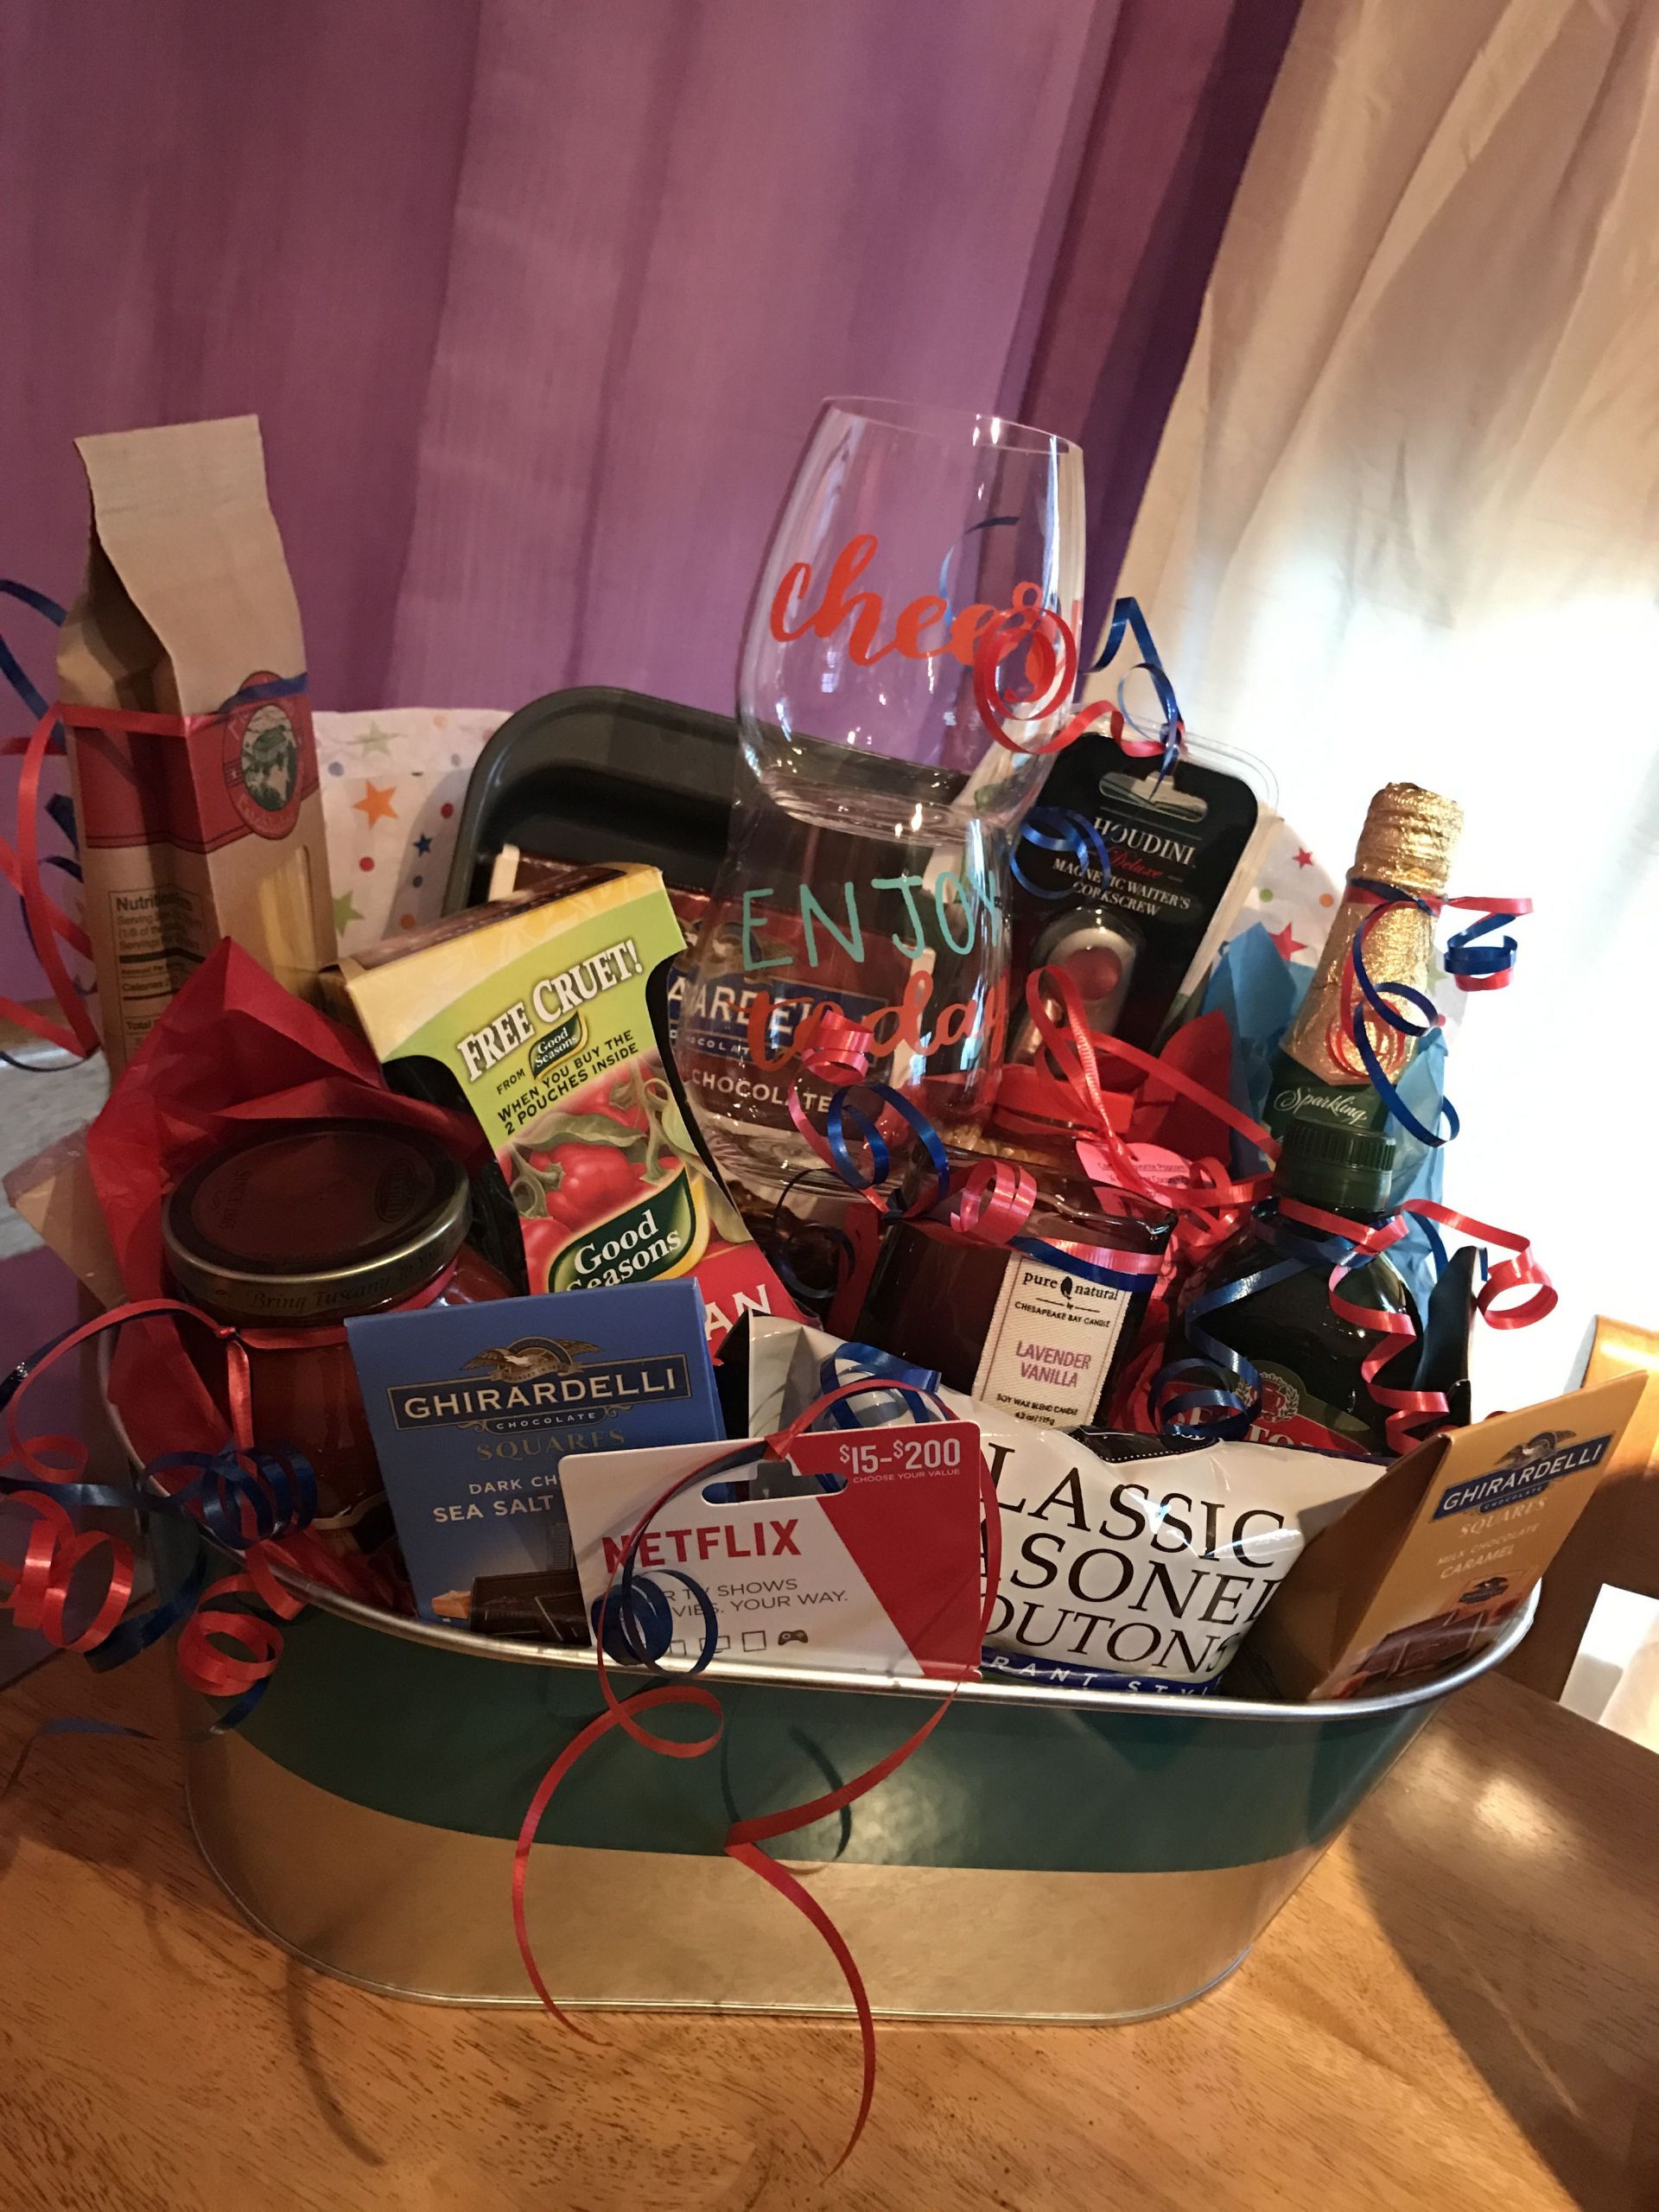 Movie Date Night Gift Basket Ideas
 Date Night In basket for Silent Auction